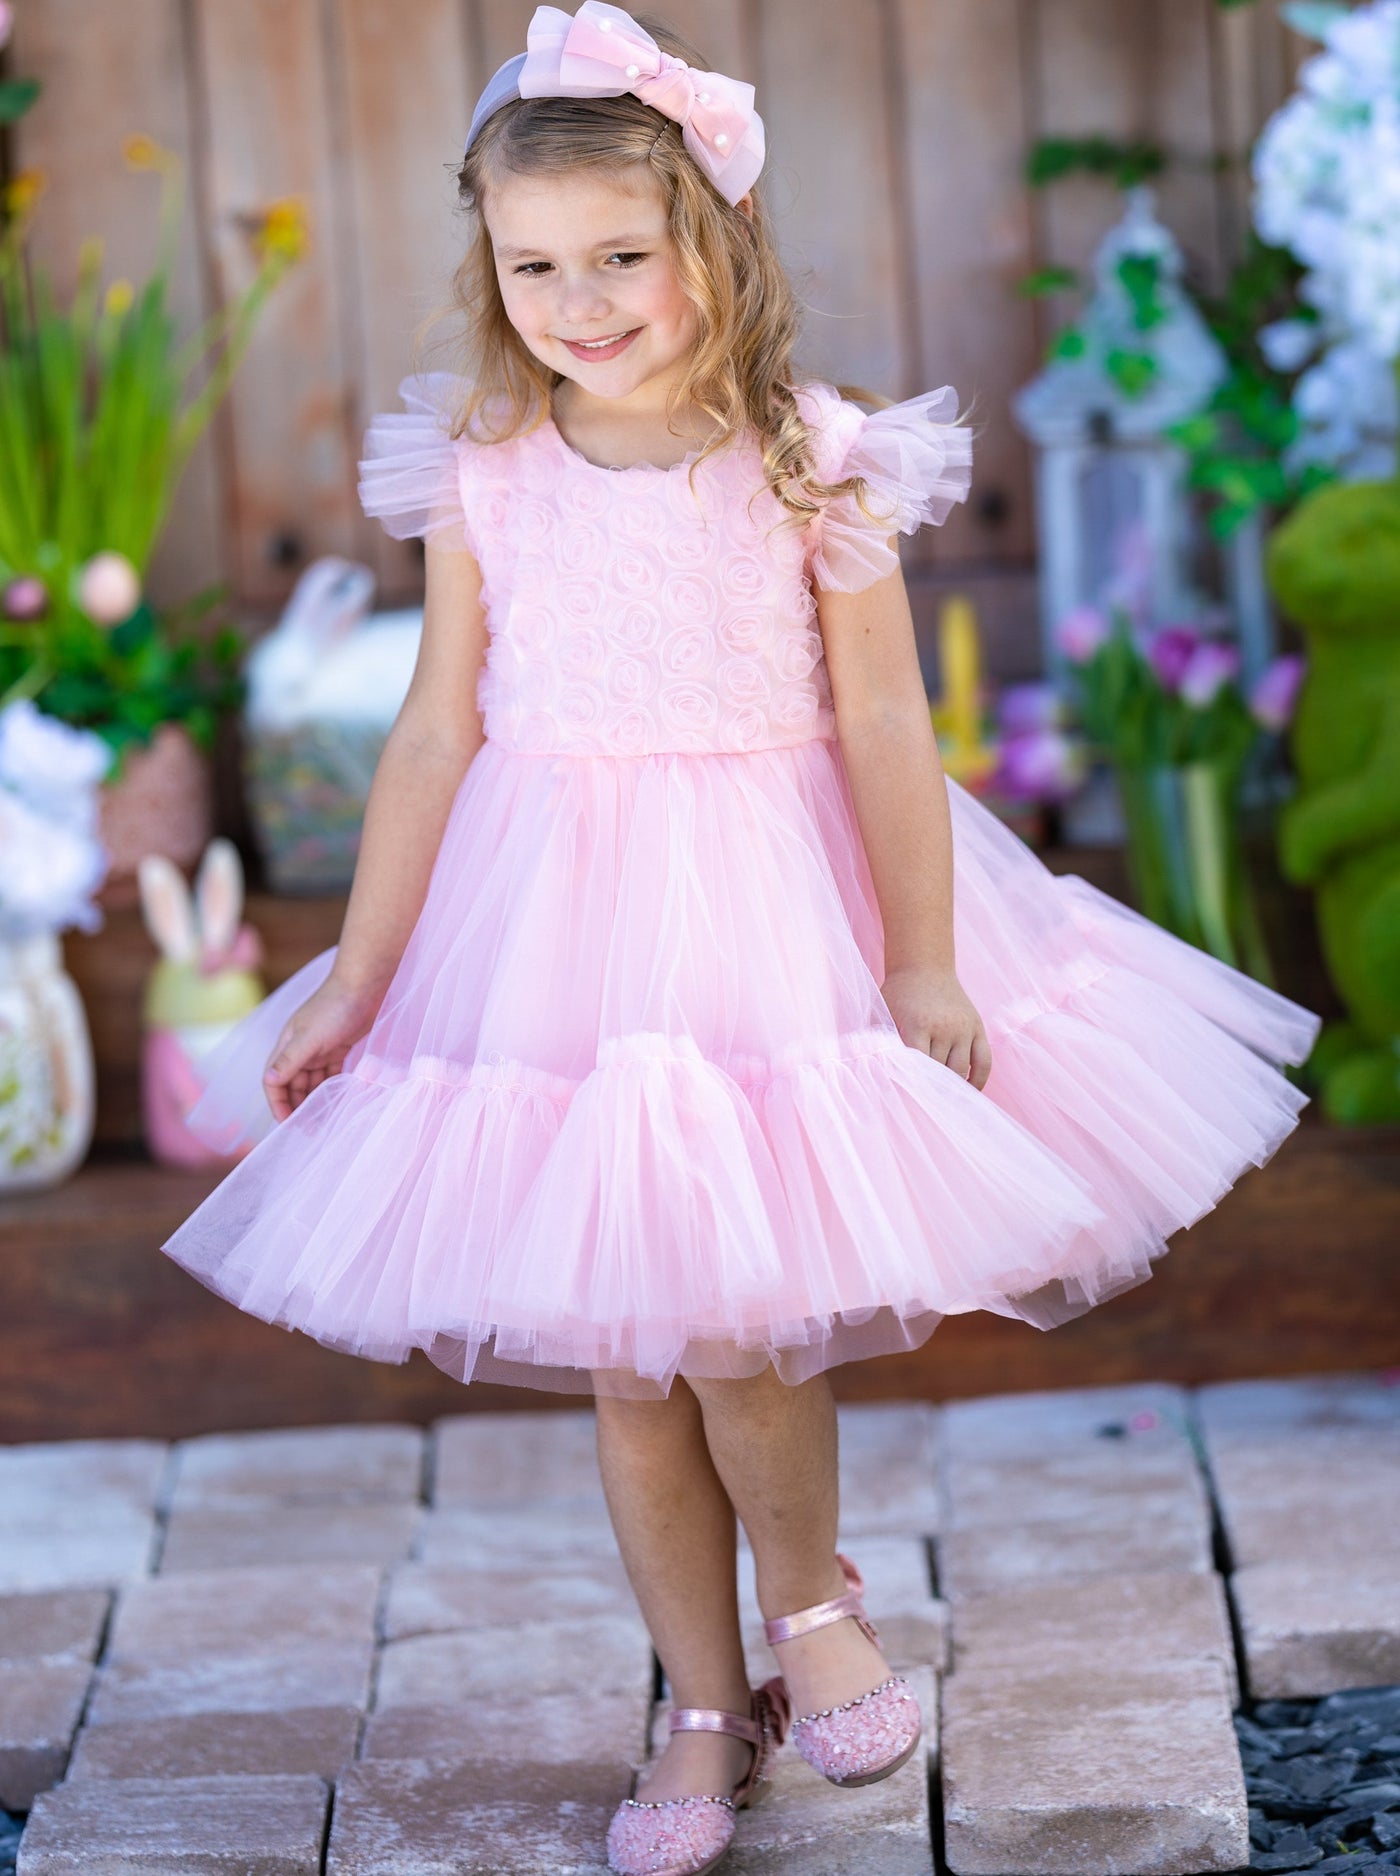 Girls Formal Dresses | Floral Applique Tulle Overlay Party Dress